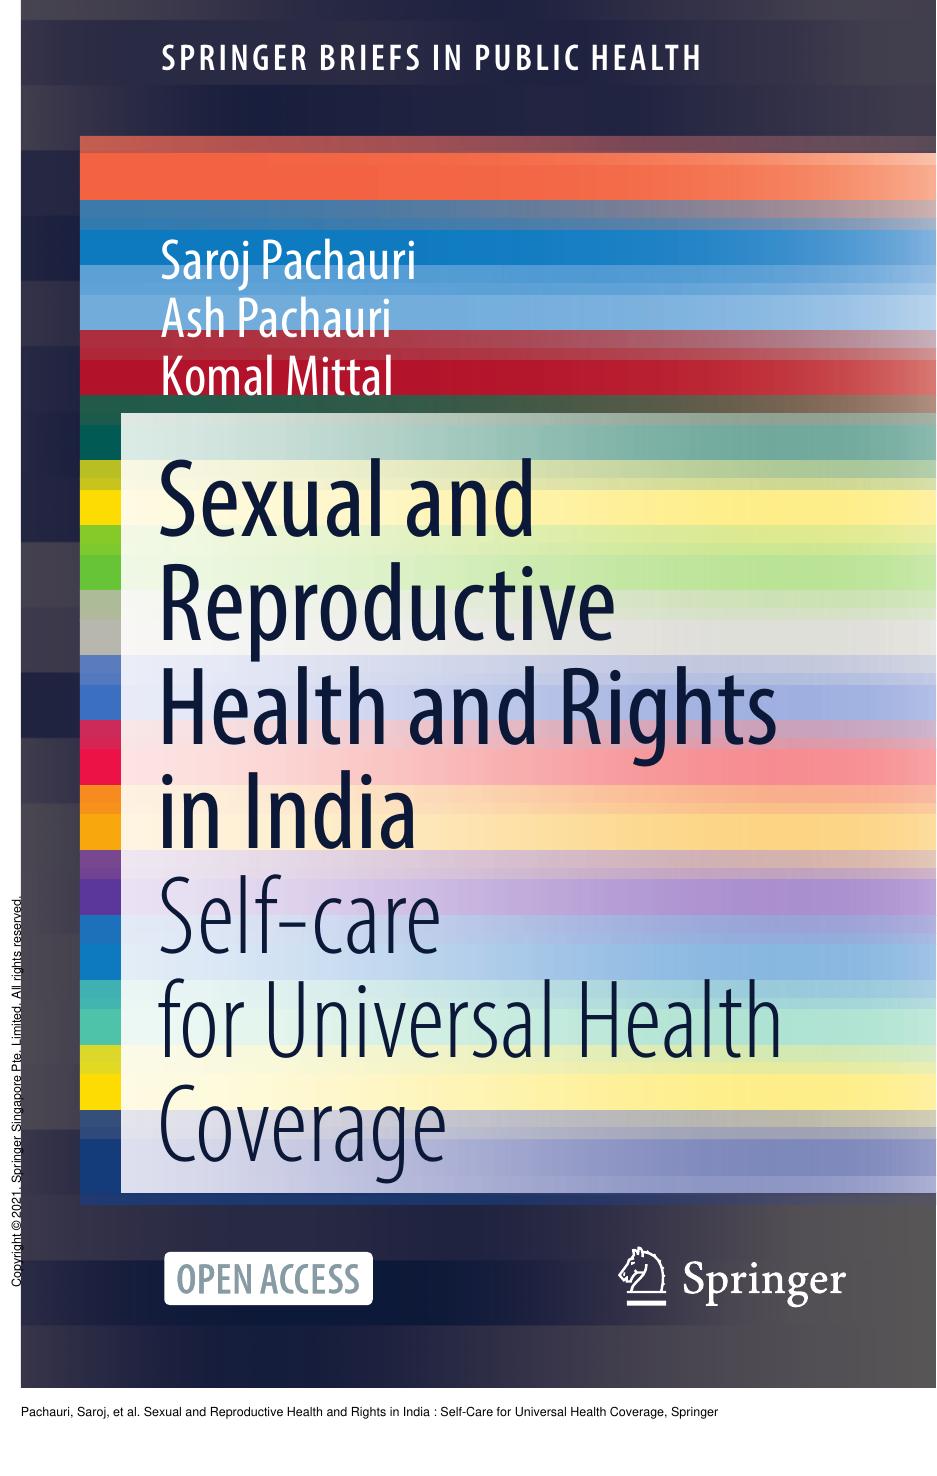 Sexual and Reproductive Health and Rights in India : Self-Care for Universal Health Coverage by Saroj Pachauri; Ash Pachauri; Komal Mittal